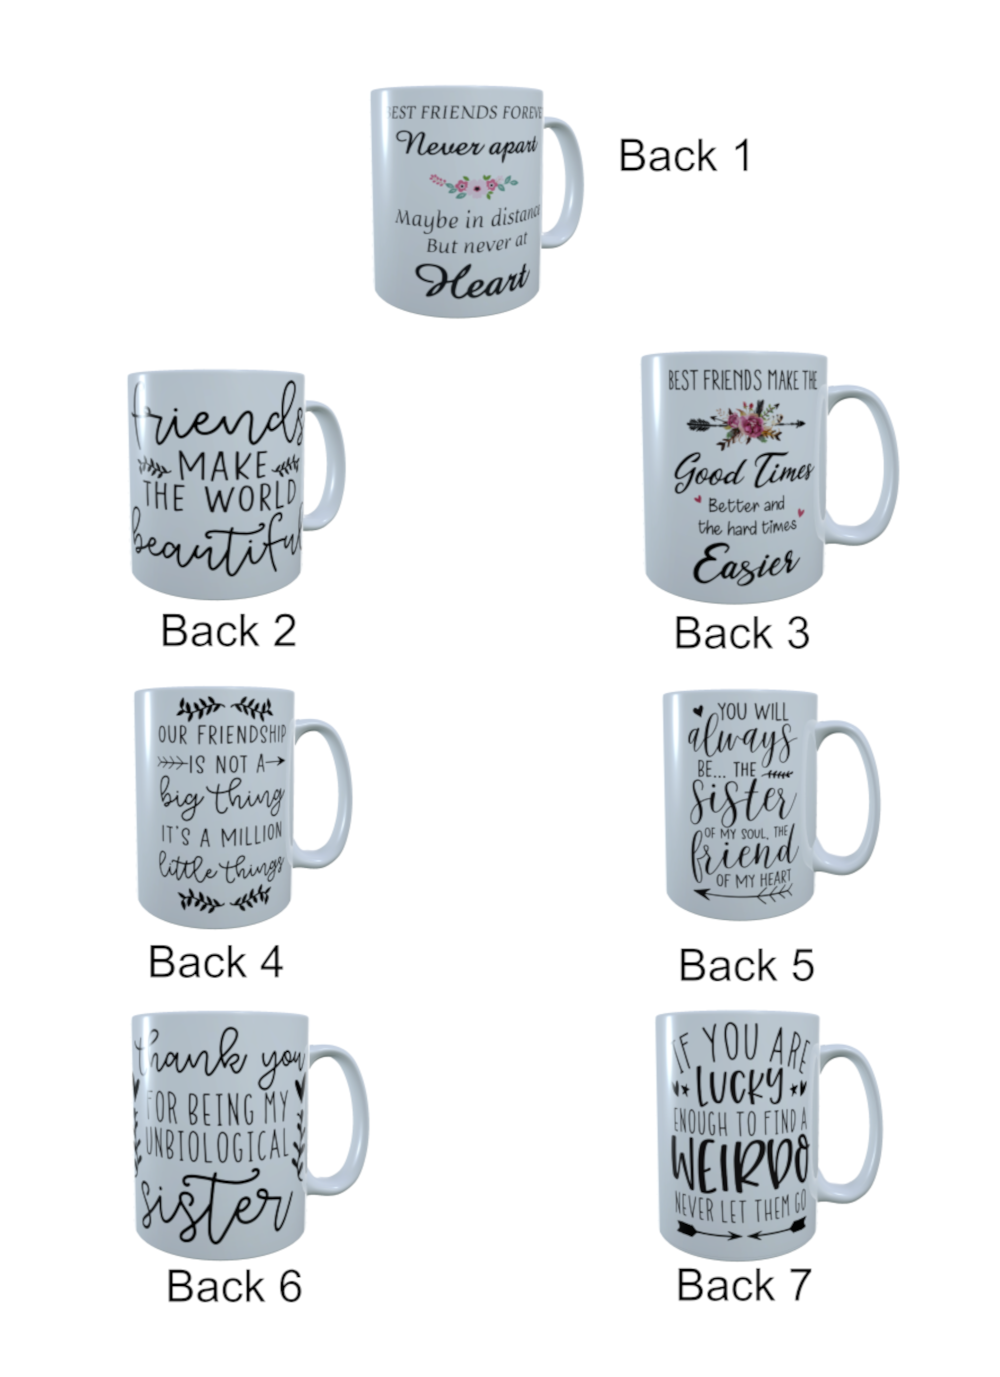 Summer Days Best Friends Forever Mug Custom Best Friends Mug 5sumfrienmug 10 00 Dads Cabin For Sisters Mugs Best Friends Mugs And Personalised Printing Custom Printed Just For You